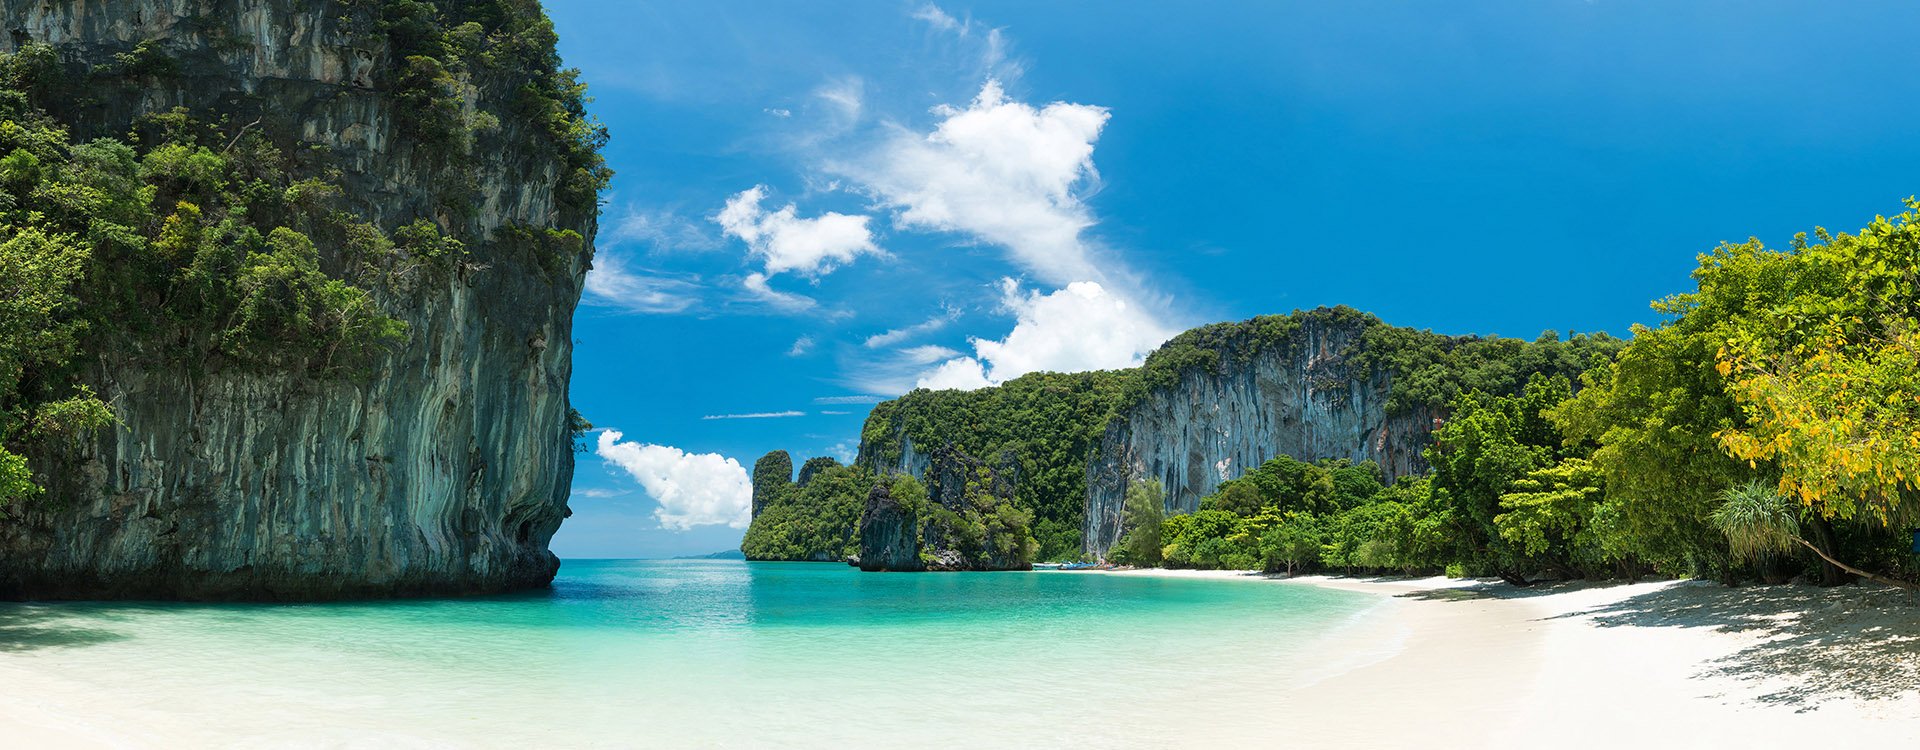 White sand beach and rock formations with clear blue waters at southern island of Thailand